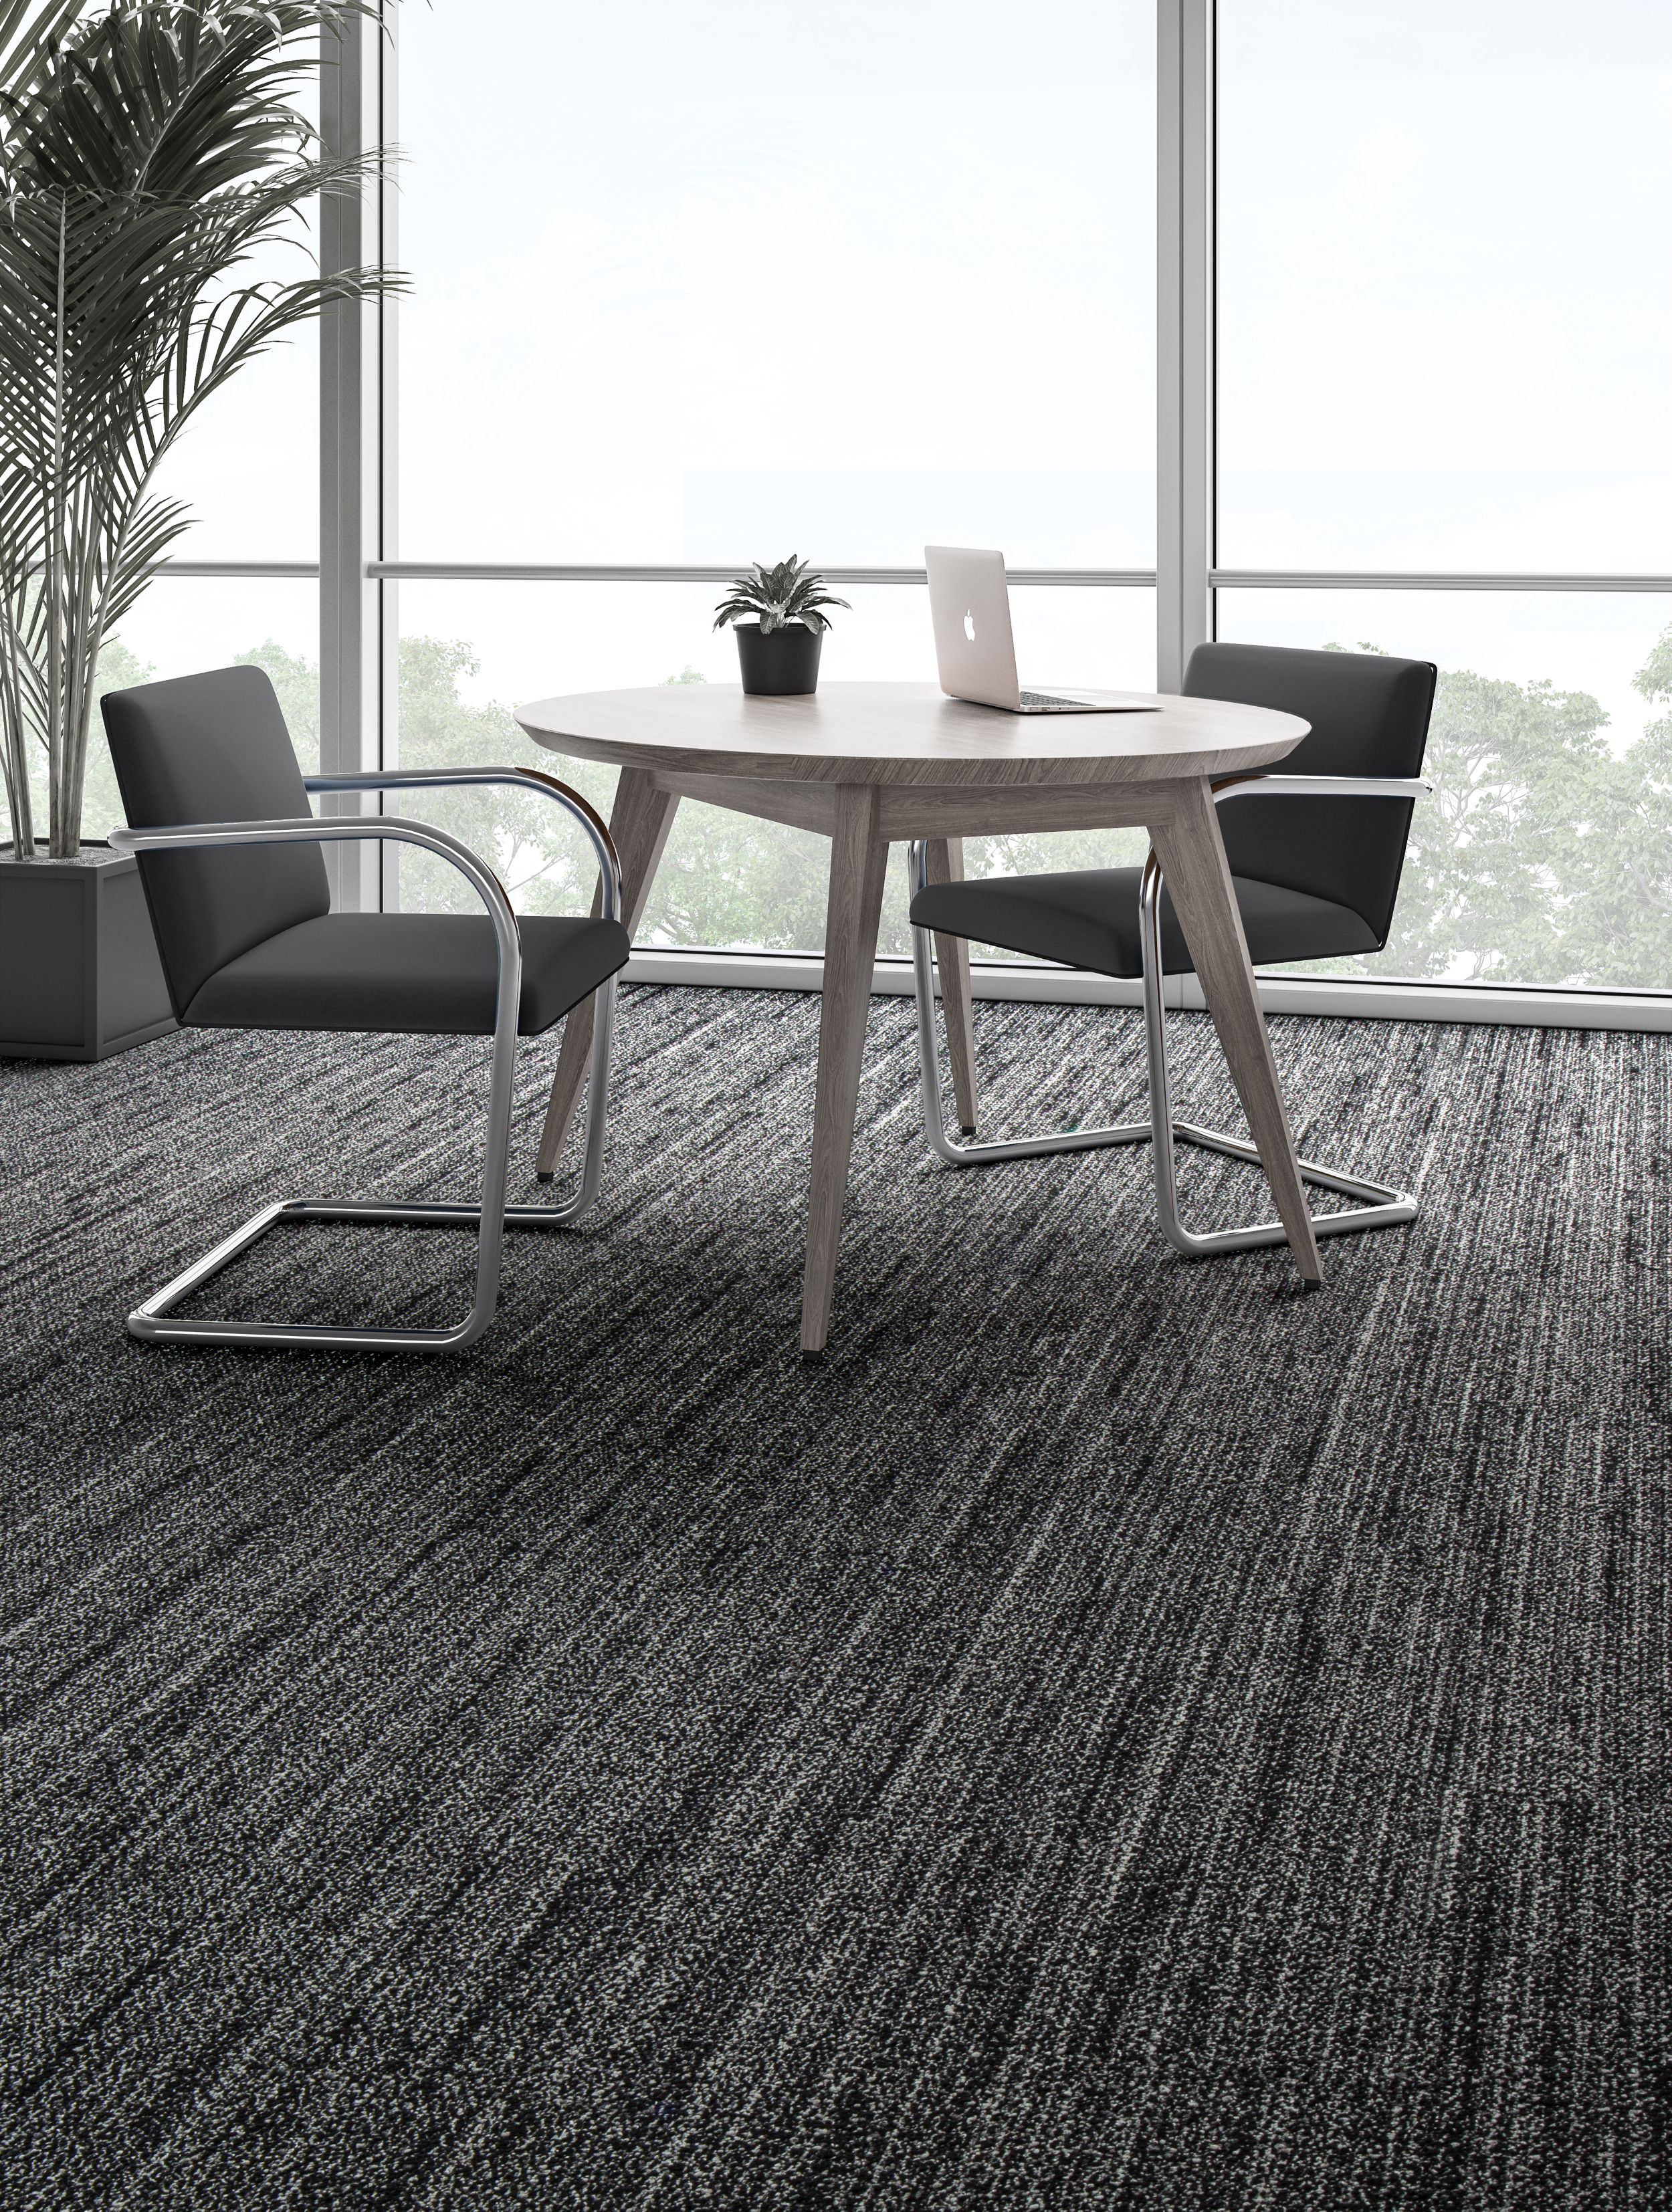 Interface WW870 plank carpet tile shown with small table and chairs imagen número 12